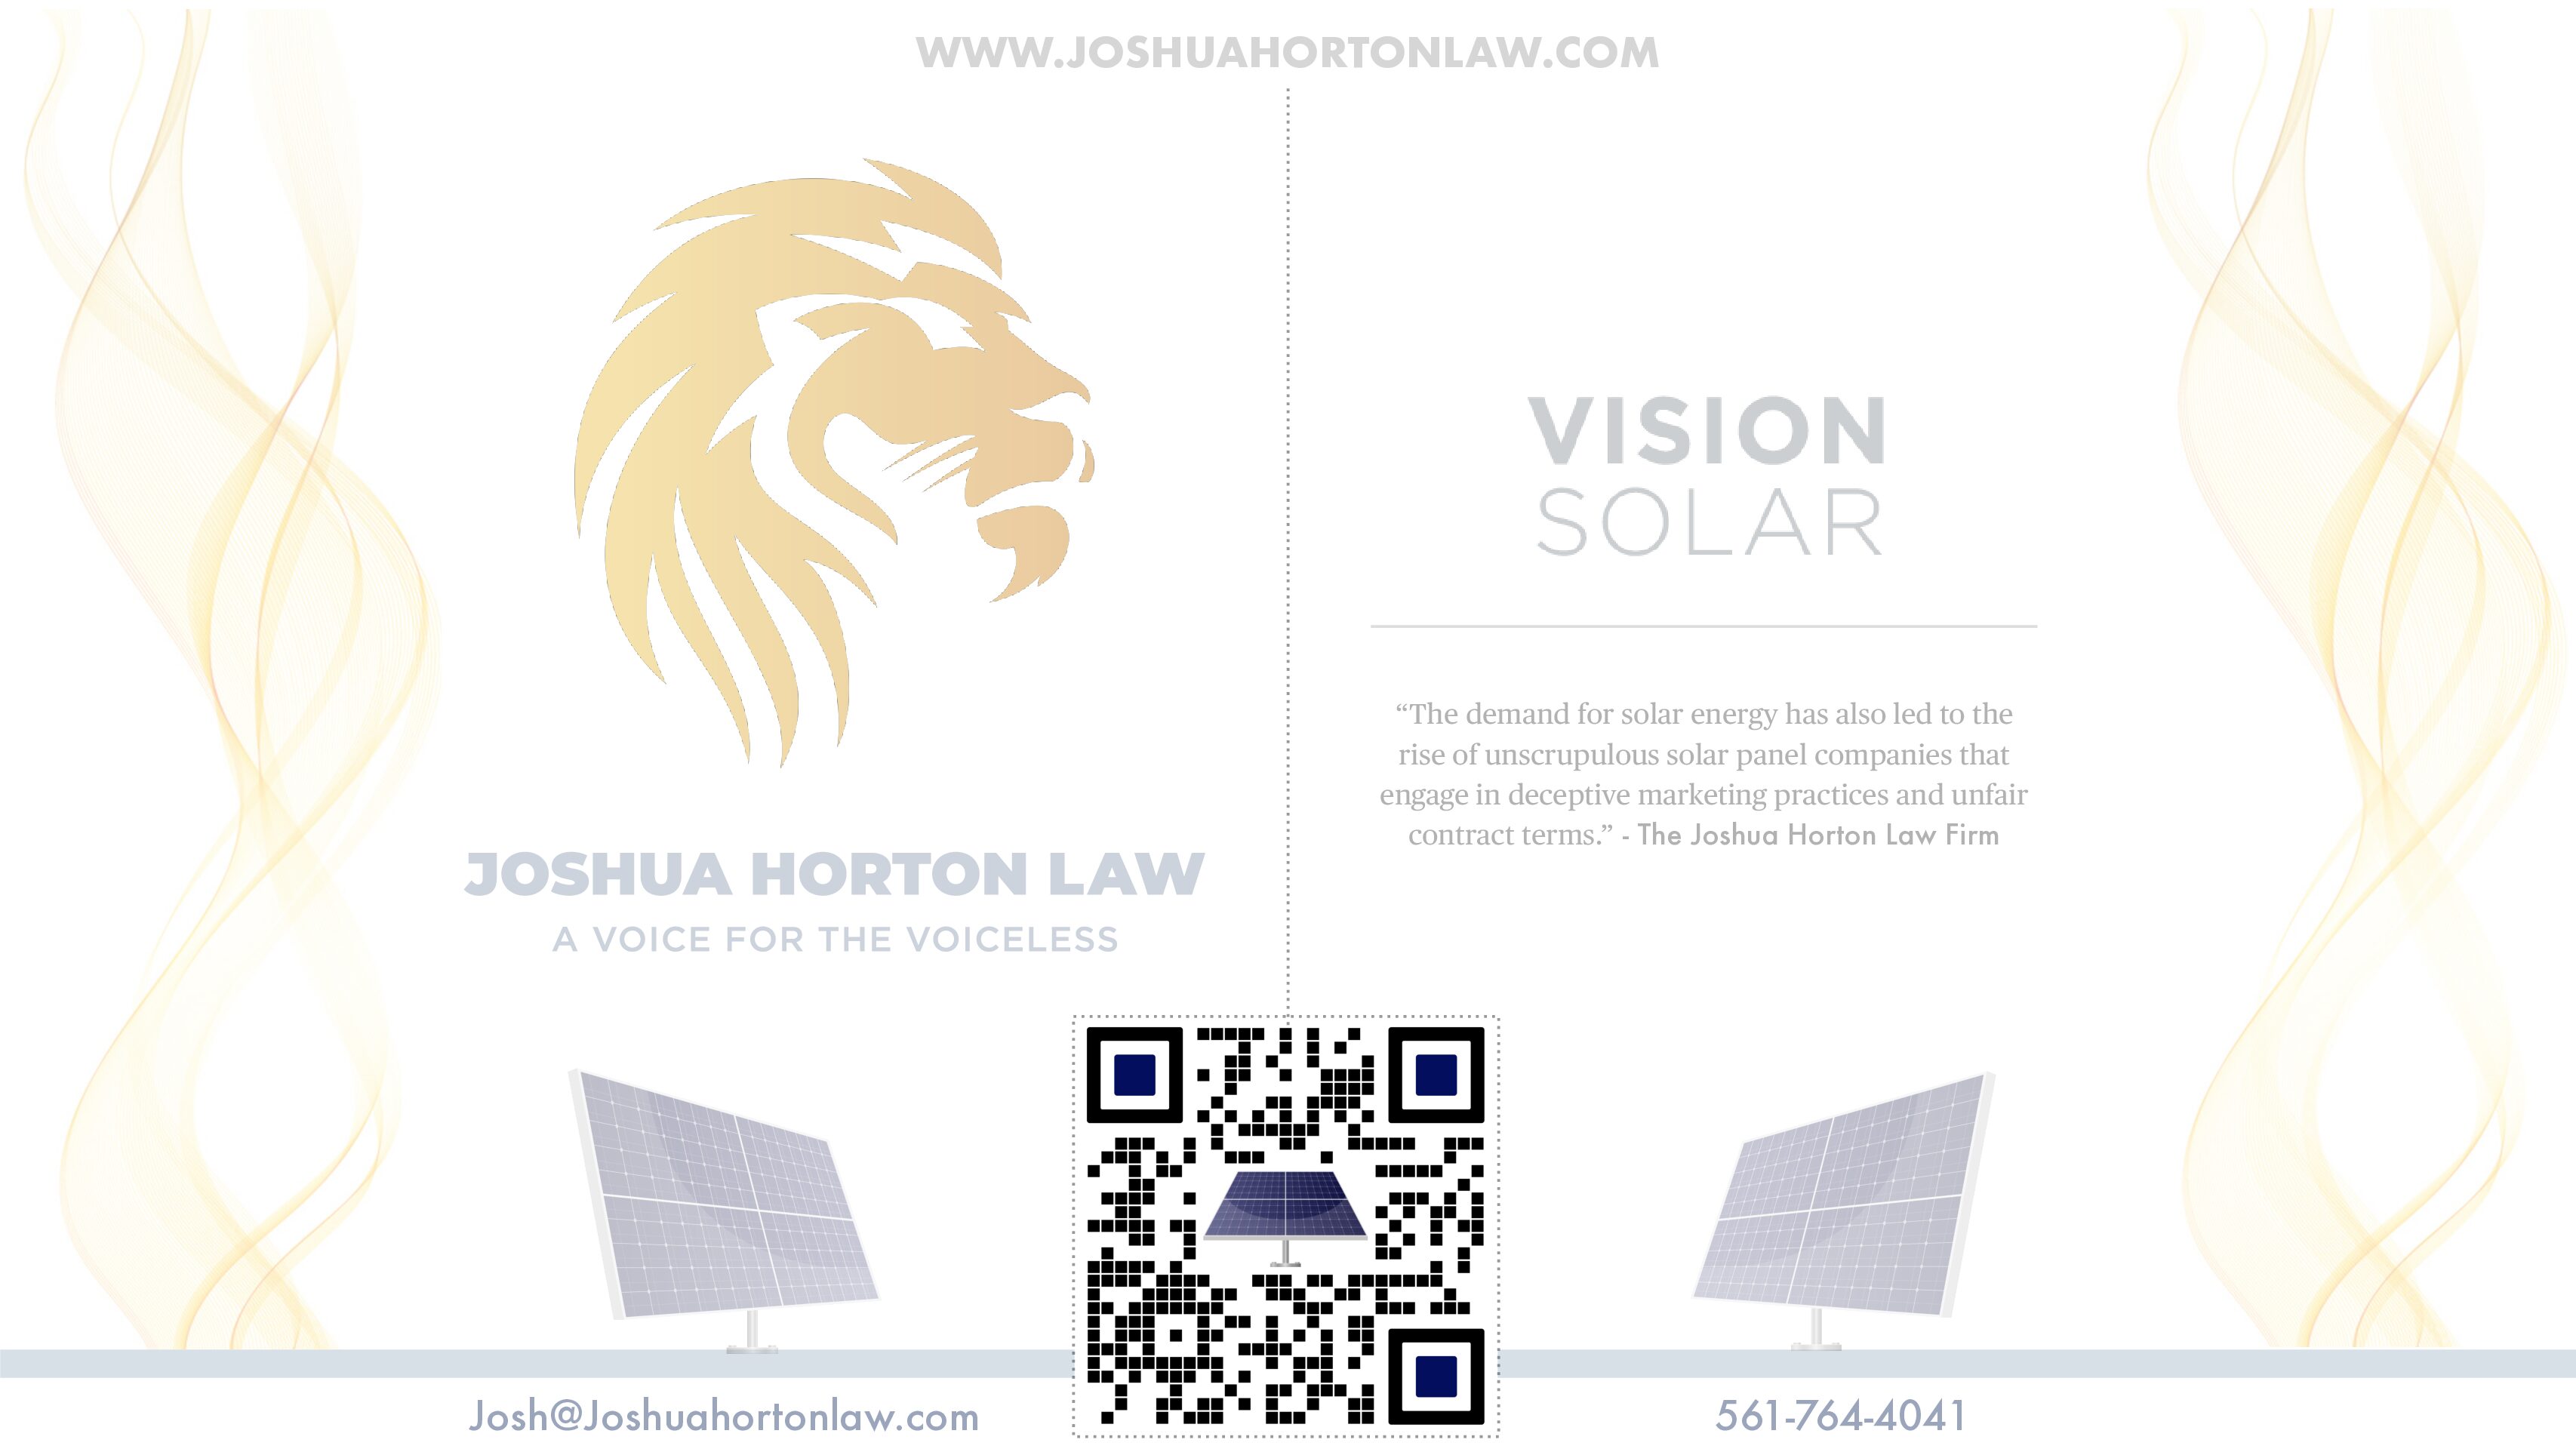 The Joshua Horton Law Firm Takes on Vision Solar in Battle Against Unfair Solar Contracts